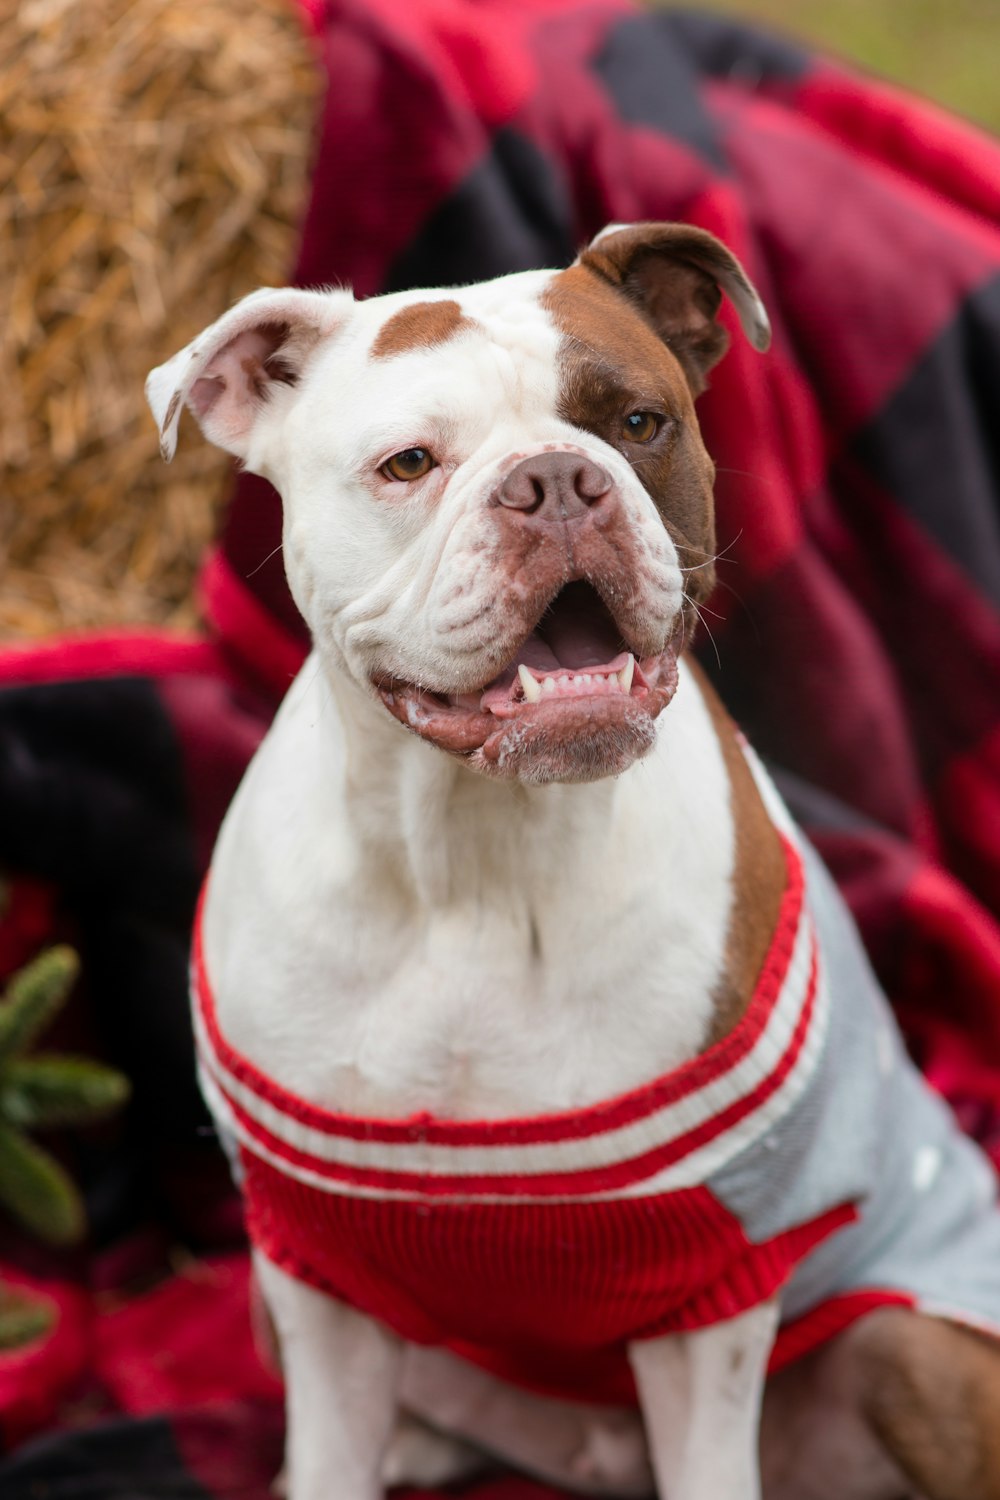 a brown and white dog wearing a red sweater